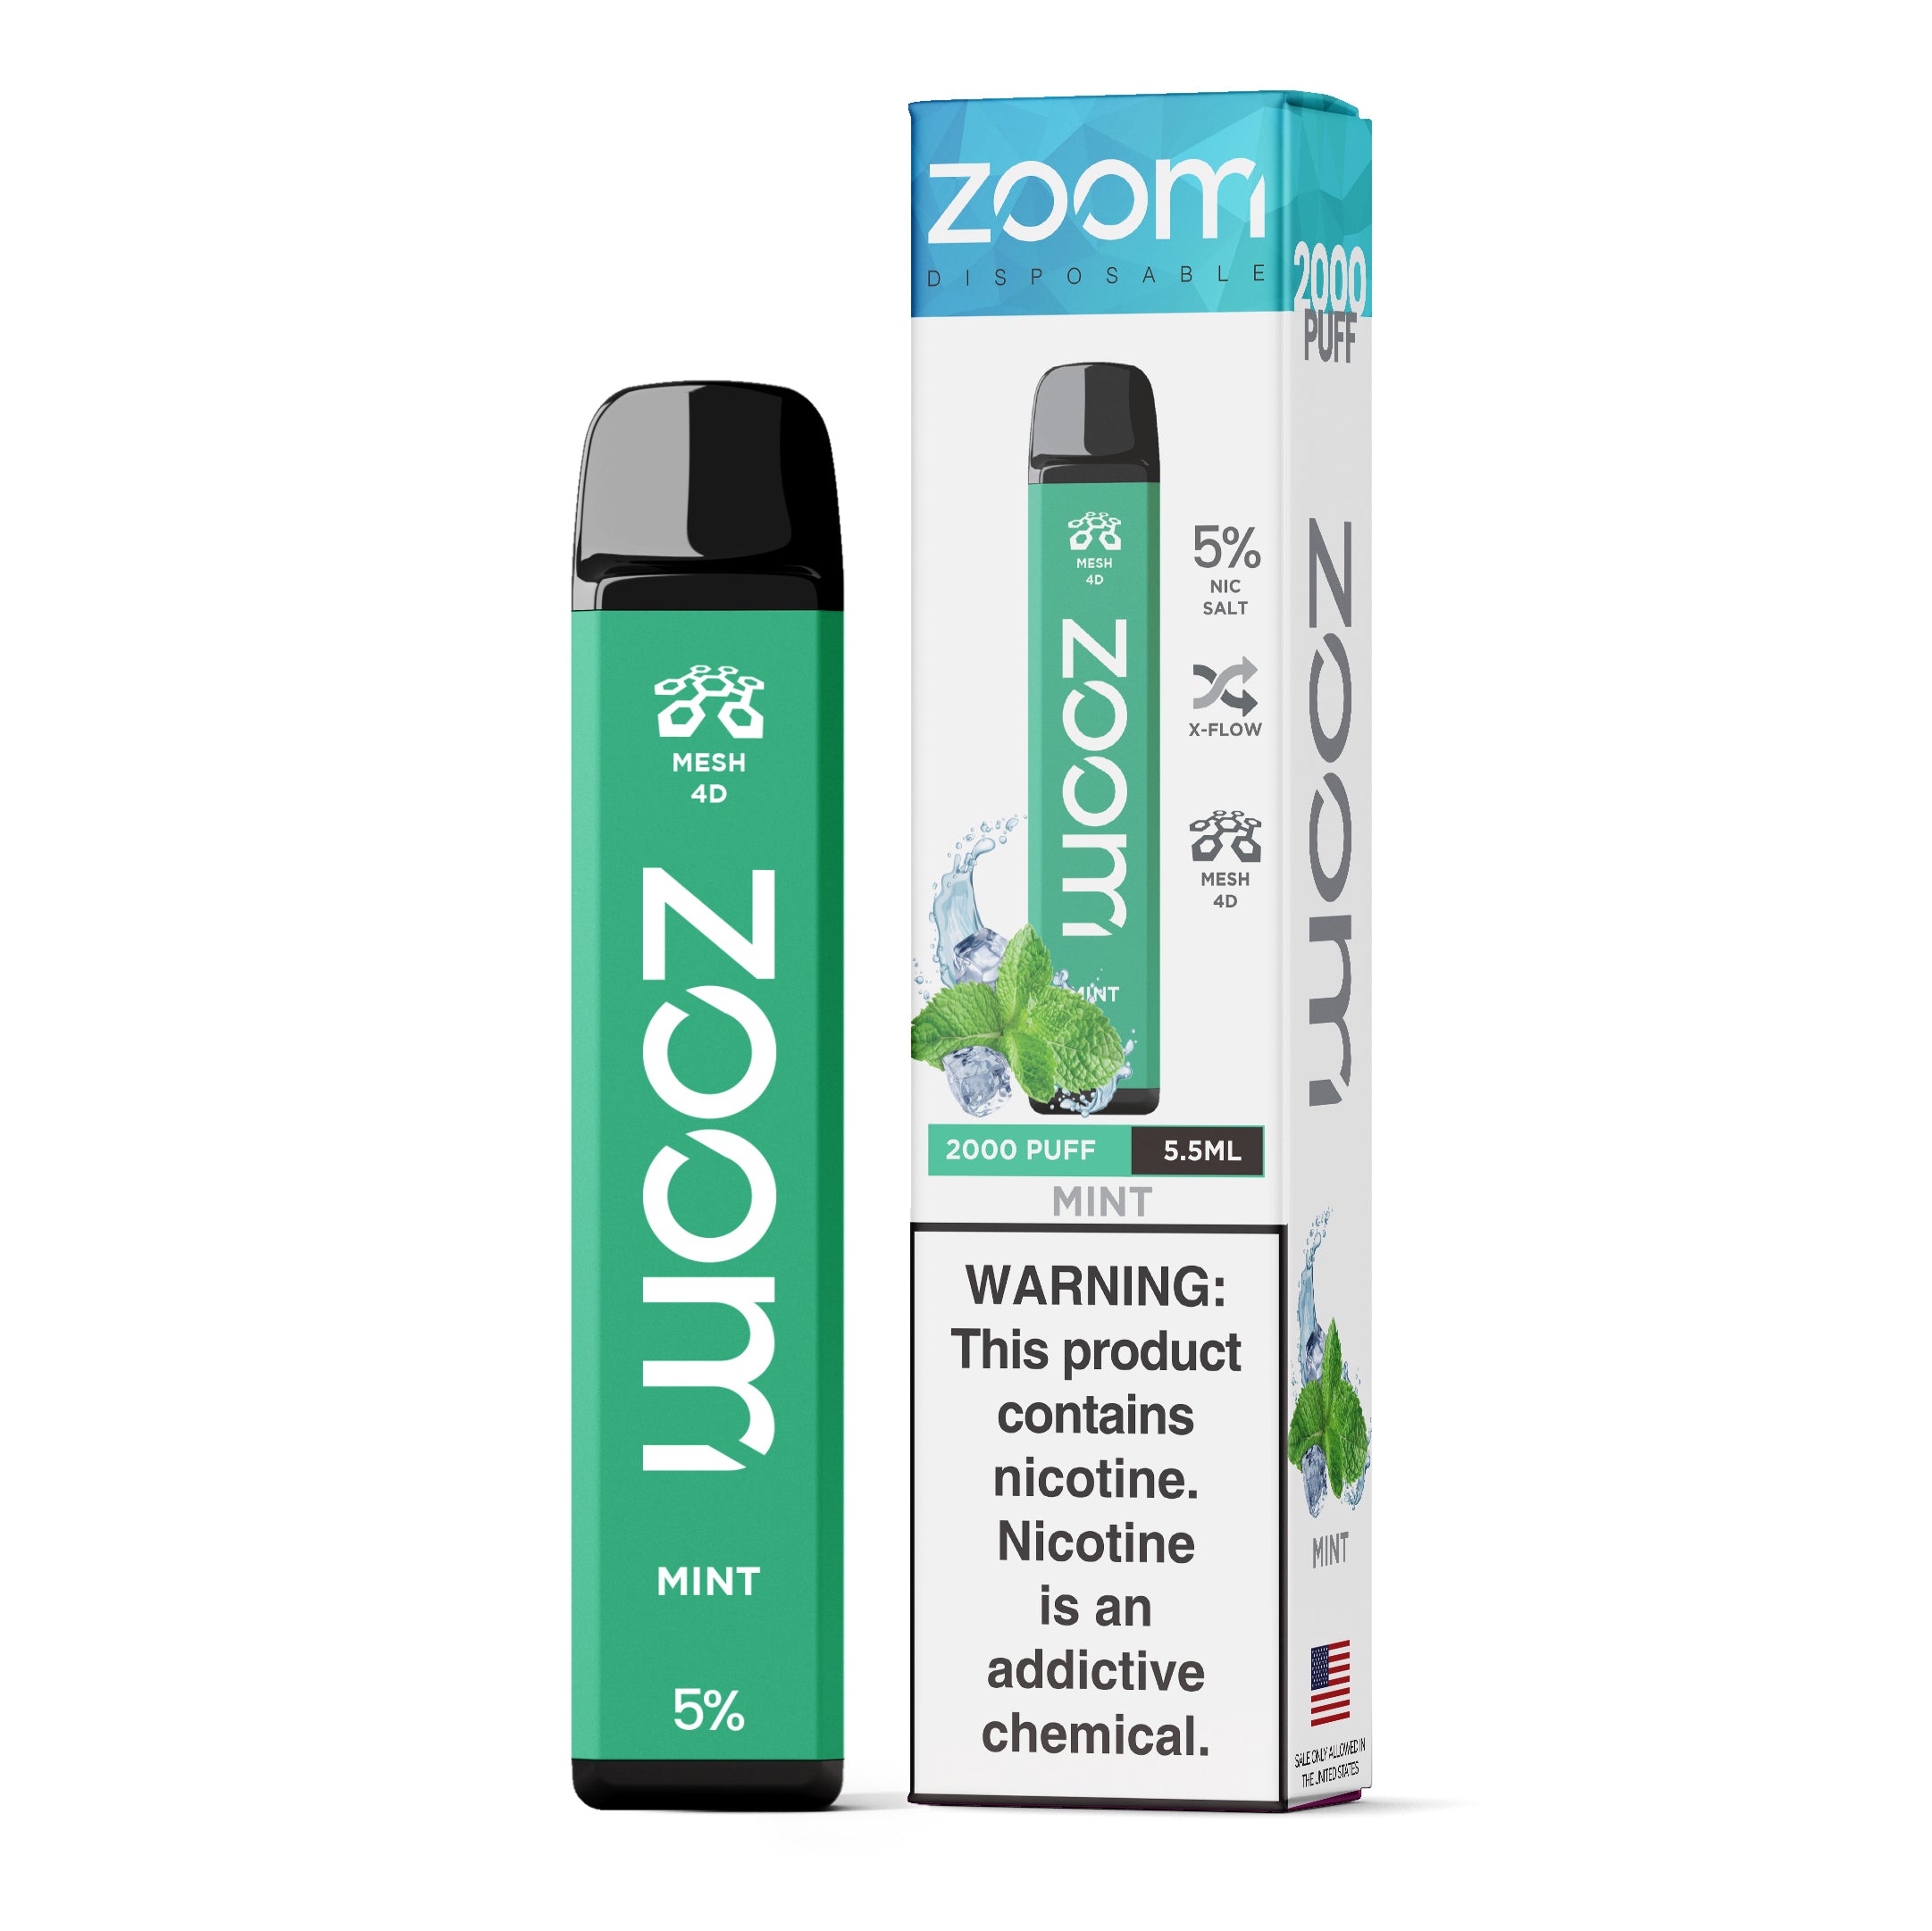 Zoom Disposable | 2000 Puffs | 5.5mL Mint with packaging